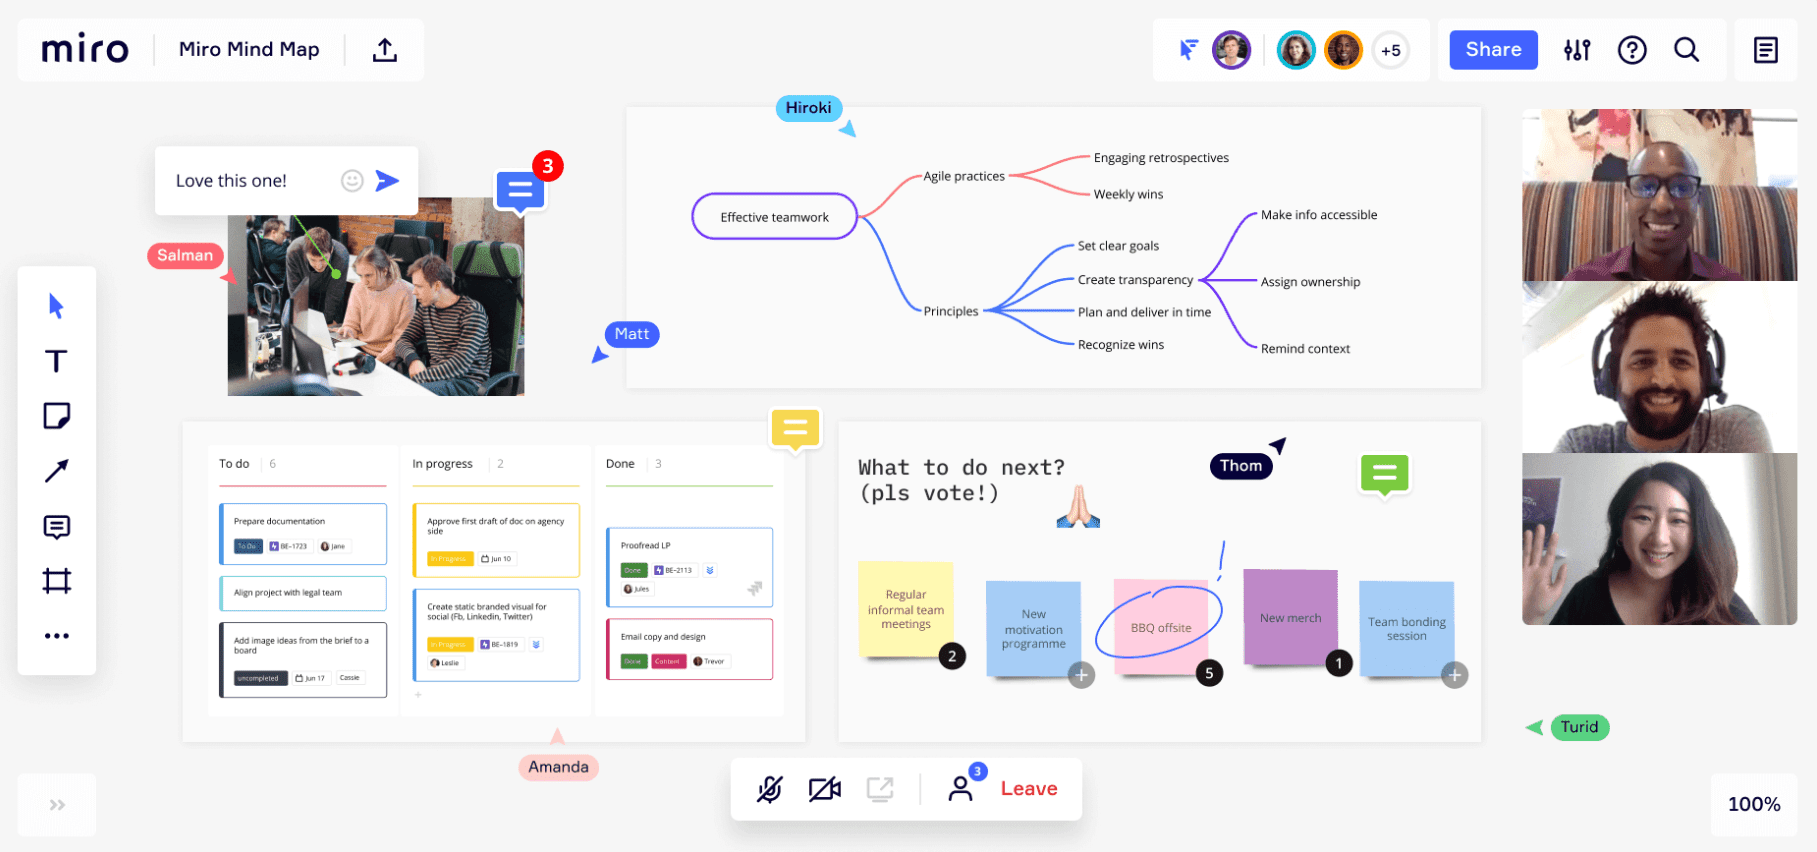 mind mapping software - miro